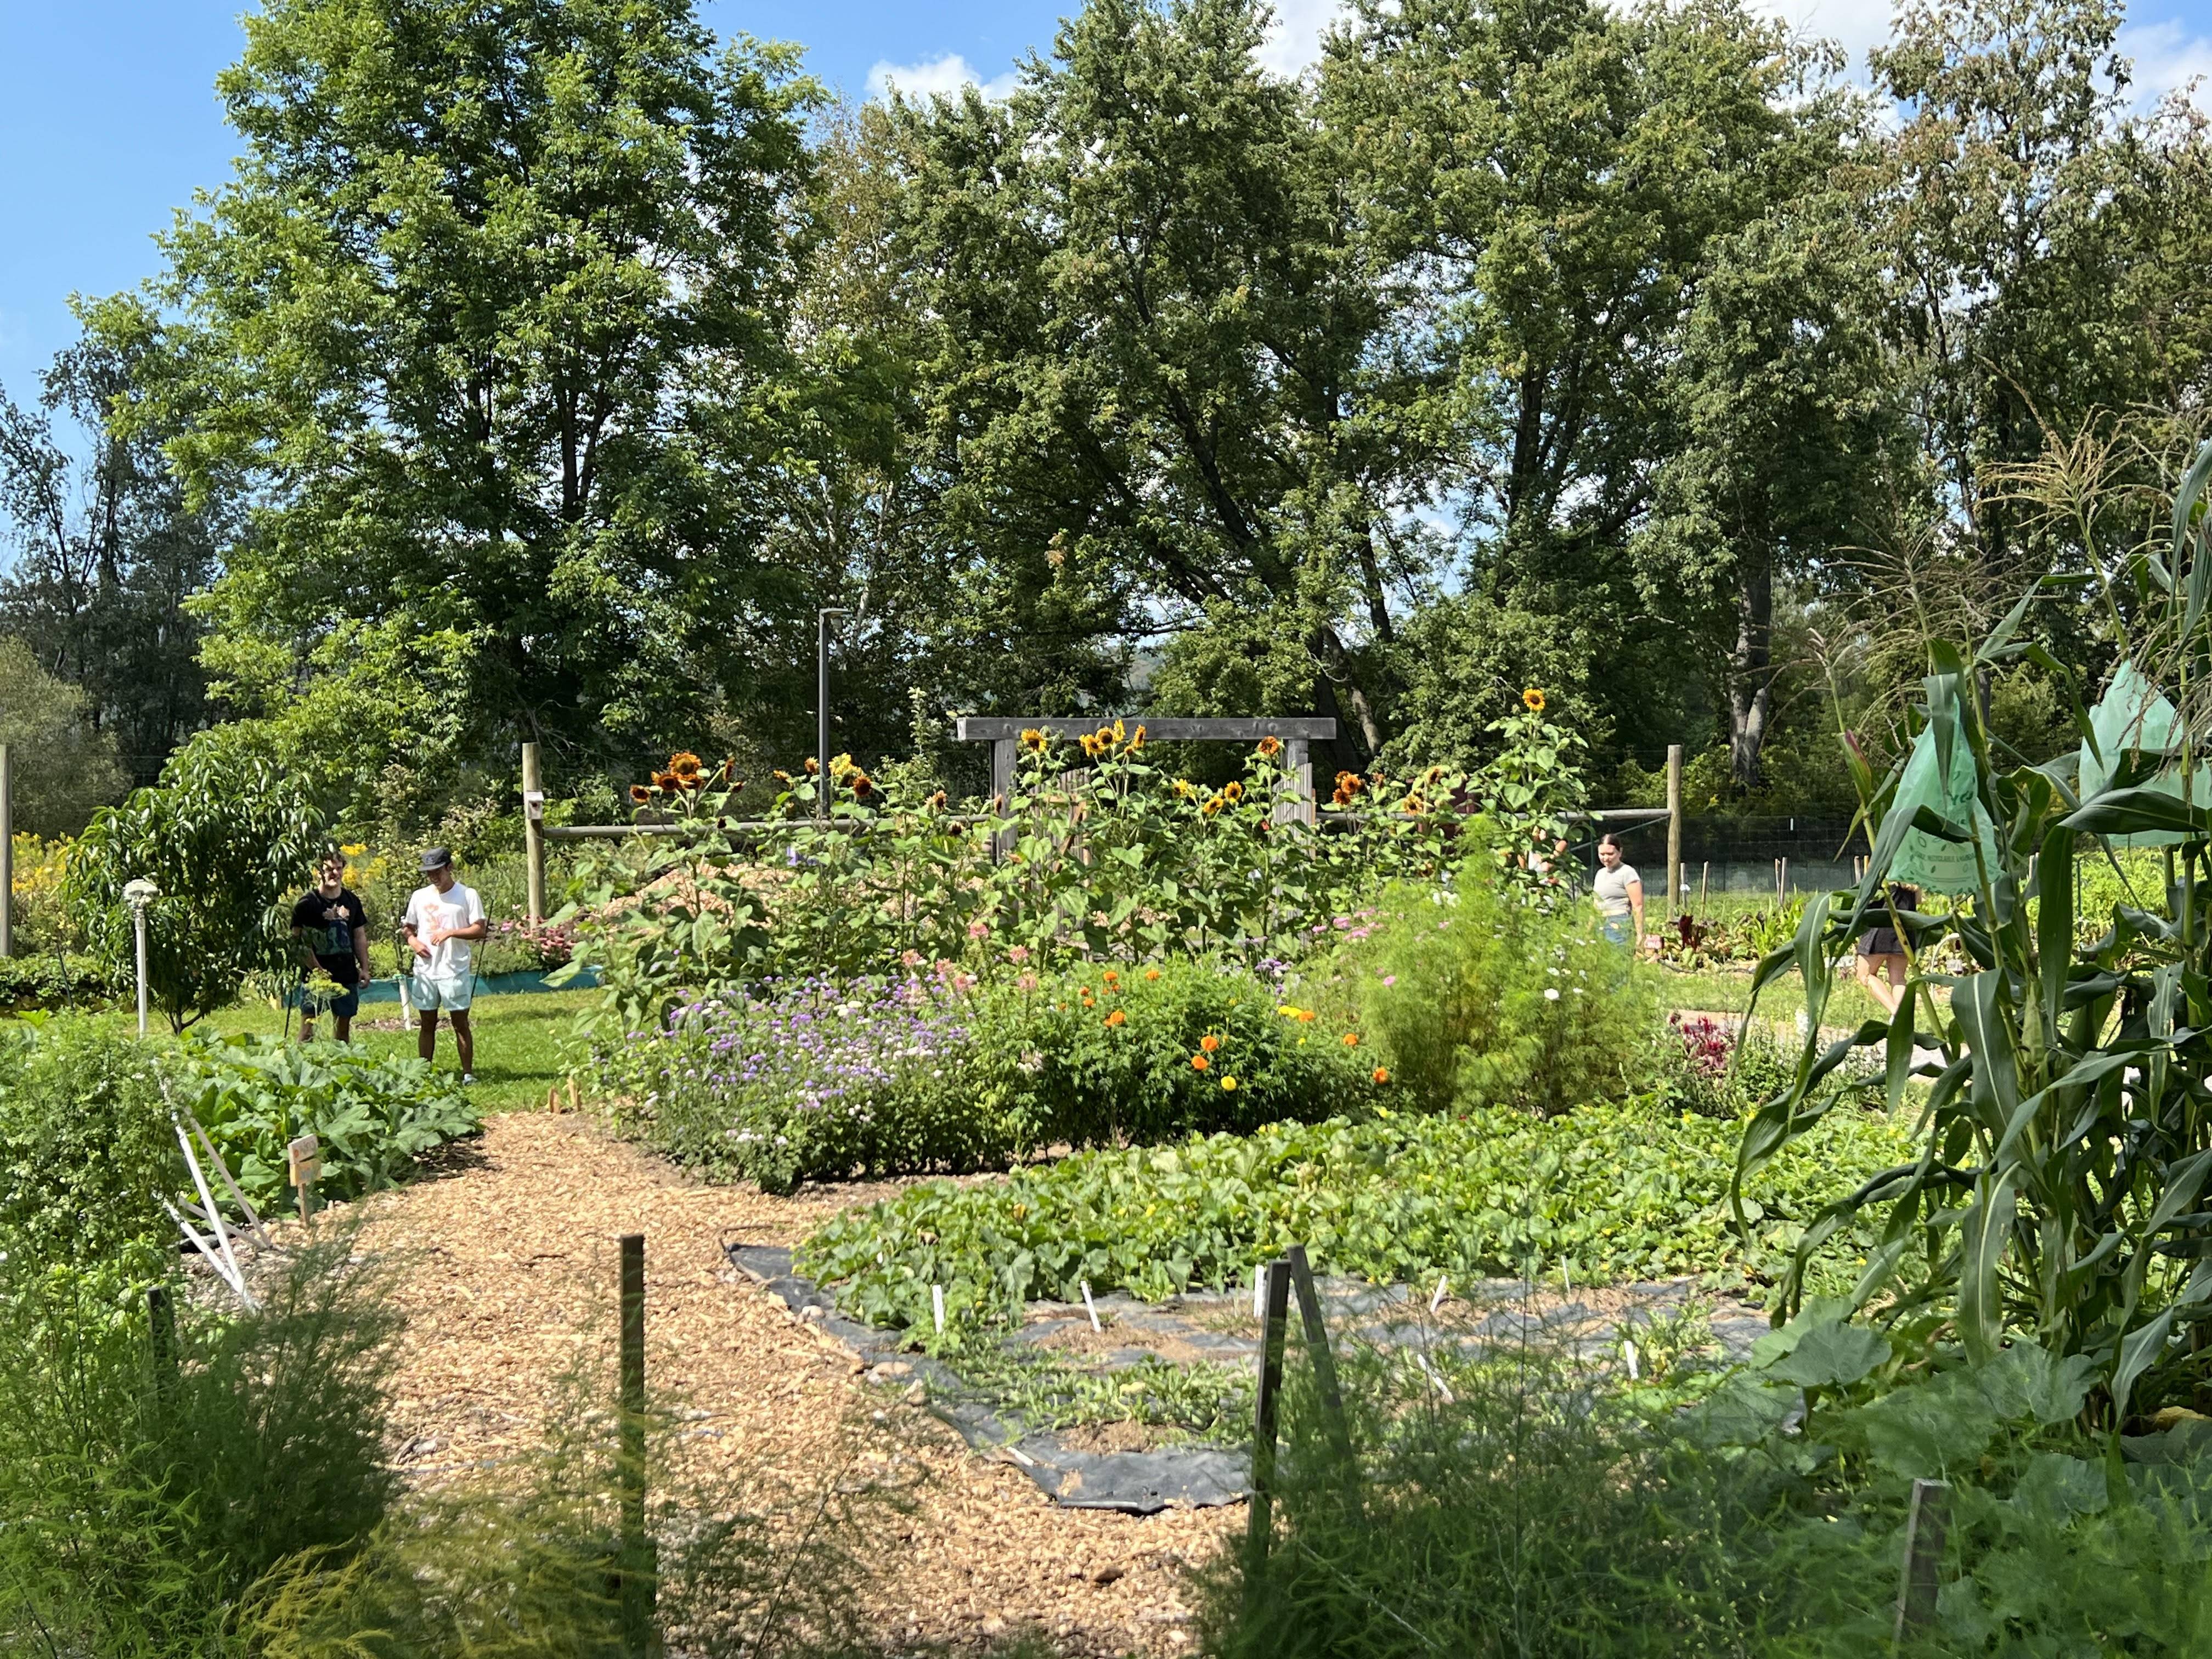 Photo of students near the fruit trees in the lush, green Community Garden.